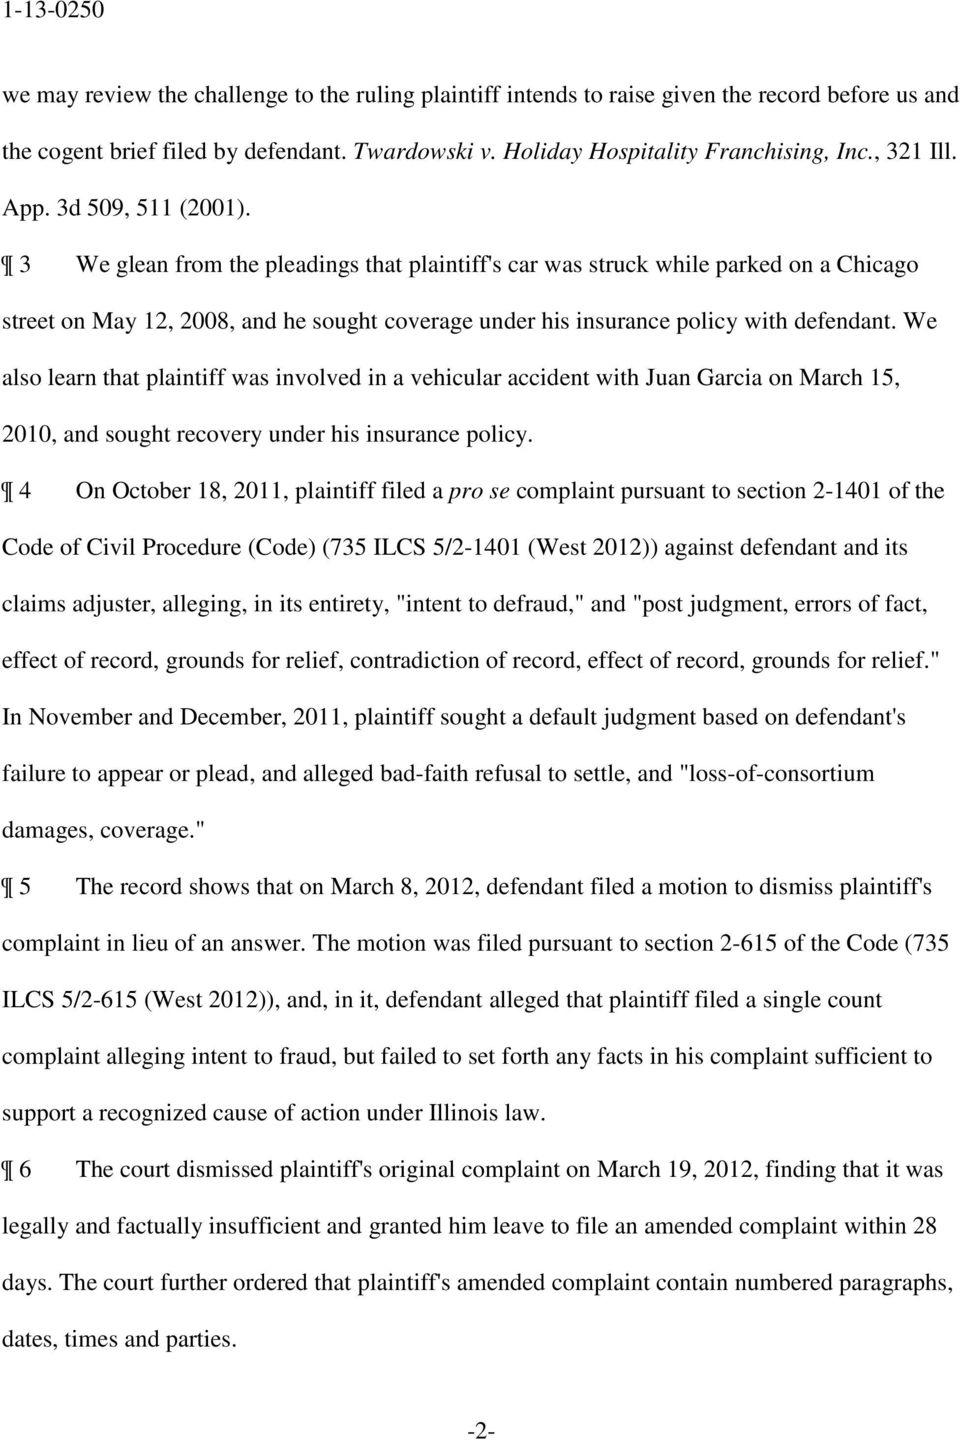 3 We glean from the pleadings that plaintiff's car was struck while parked on a Chicago street on May 12, 2008, and he sought coverage under his insurance policy with defendant.